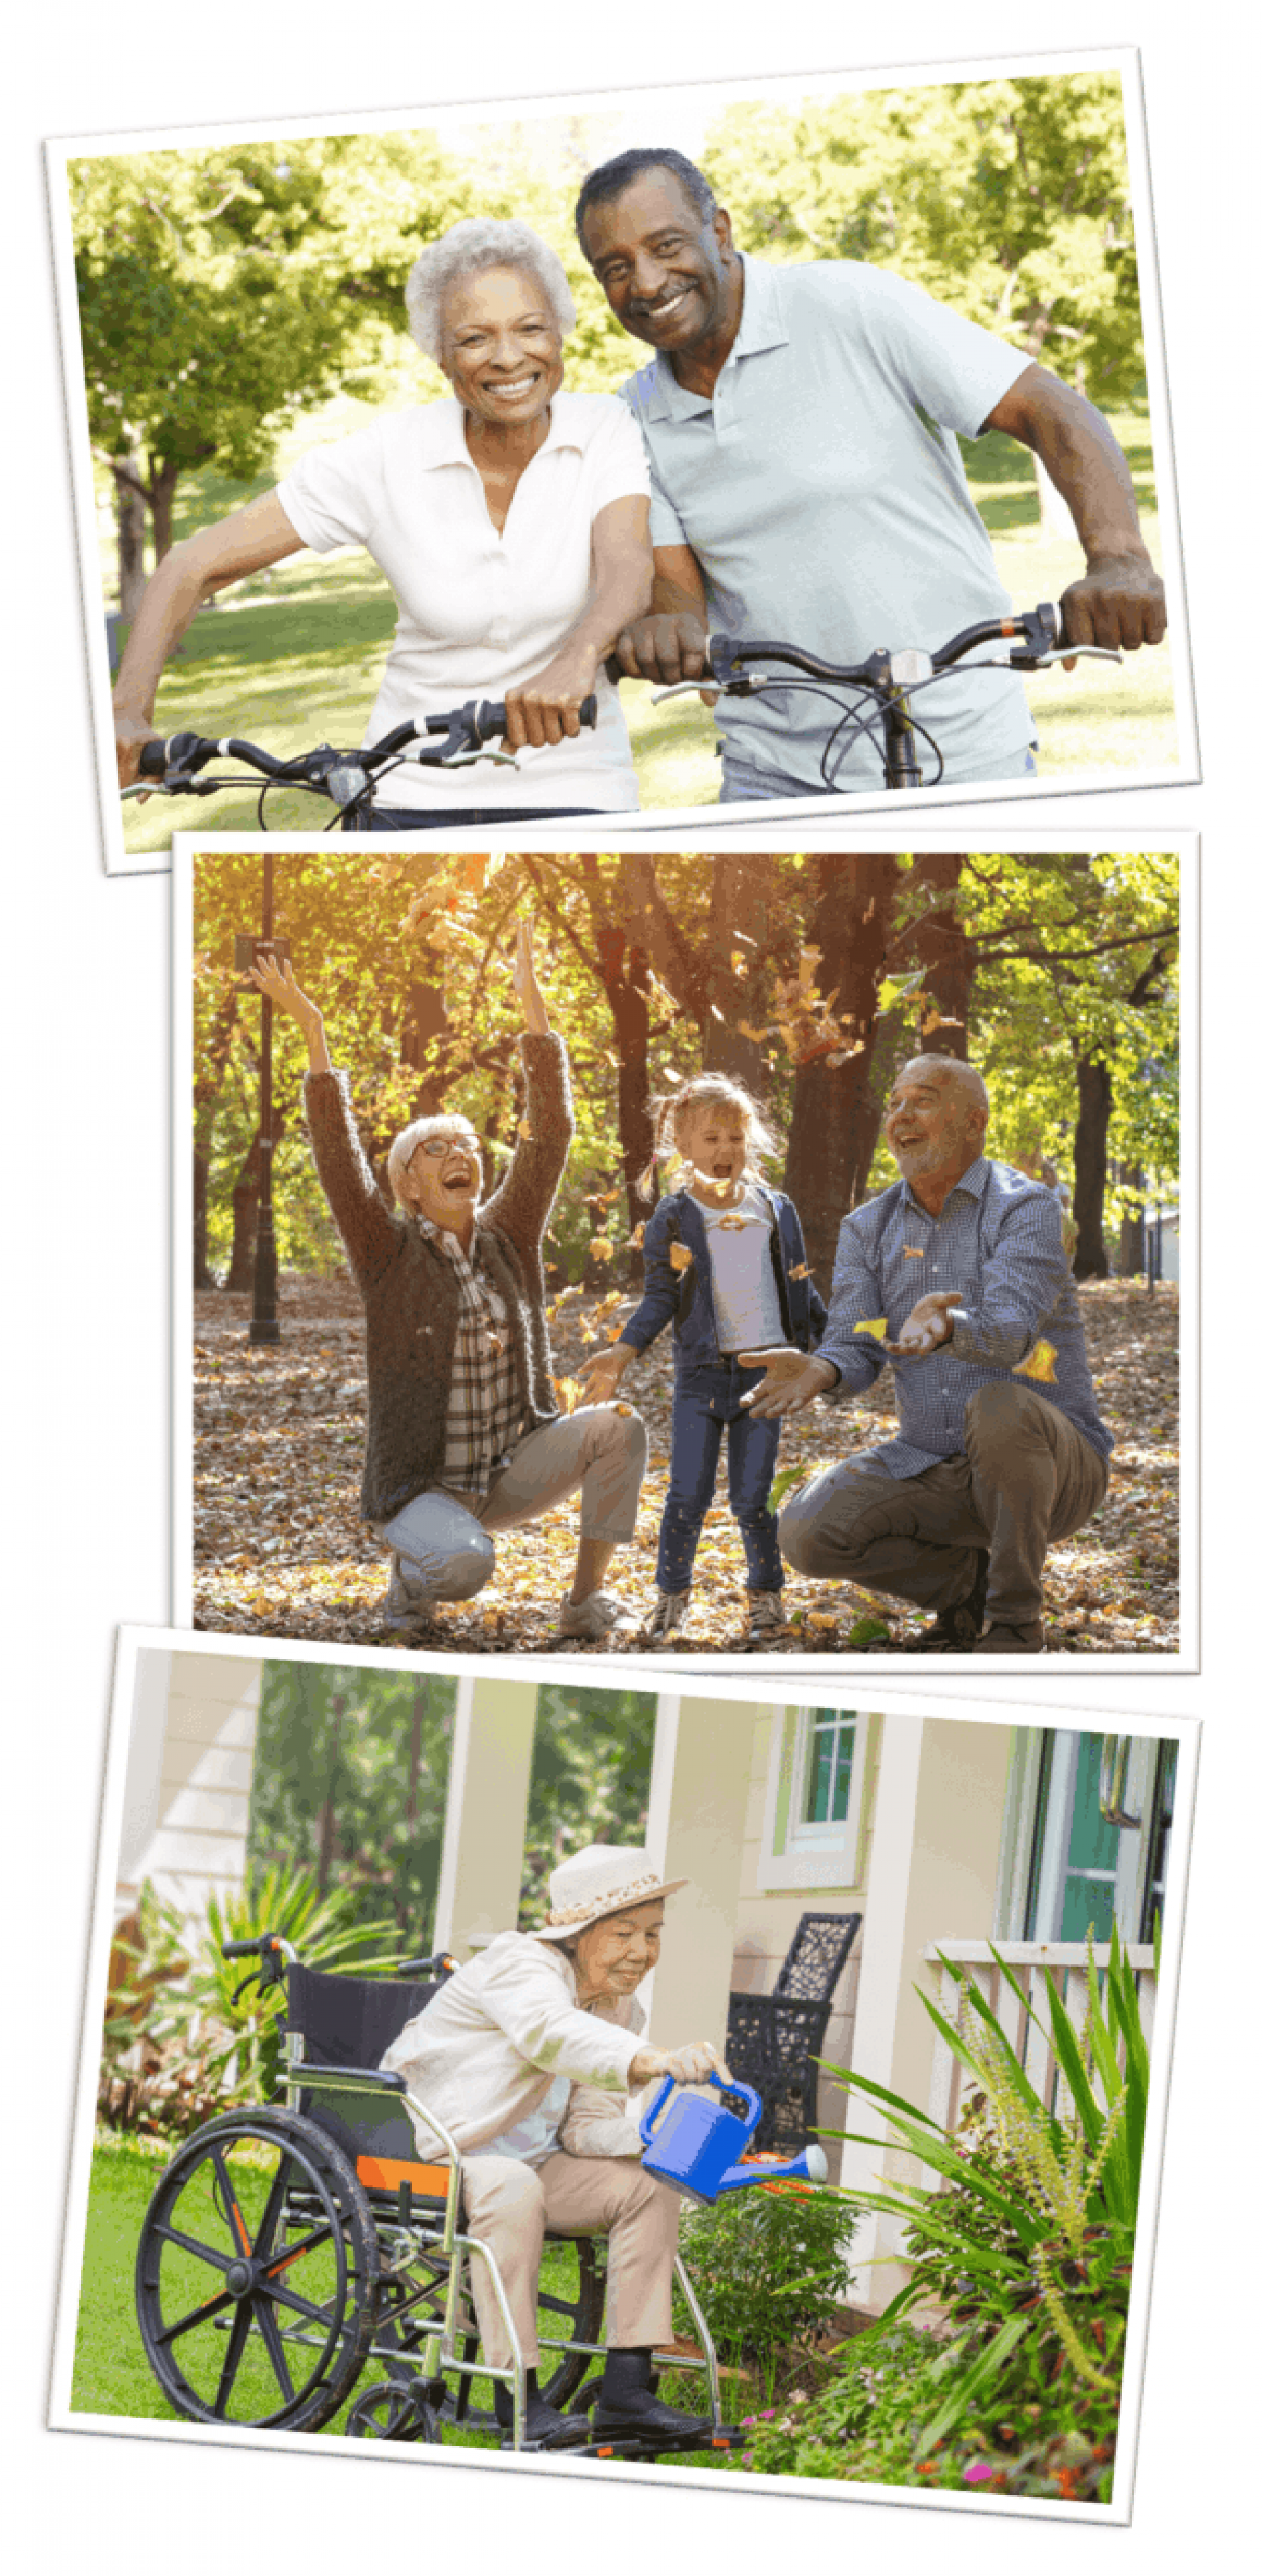 Three photographs: Grandmother, grandfather, and grandchild playing in the fall leaves; couple riding bikes together; woman in wheelchair watering her flower garden.